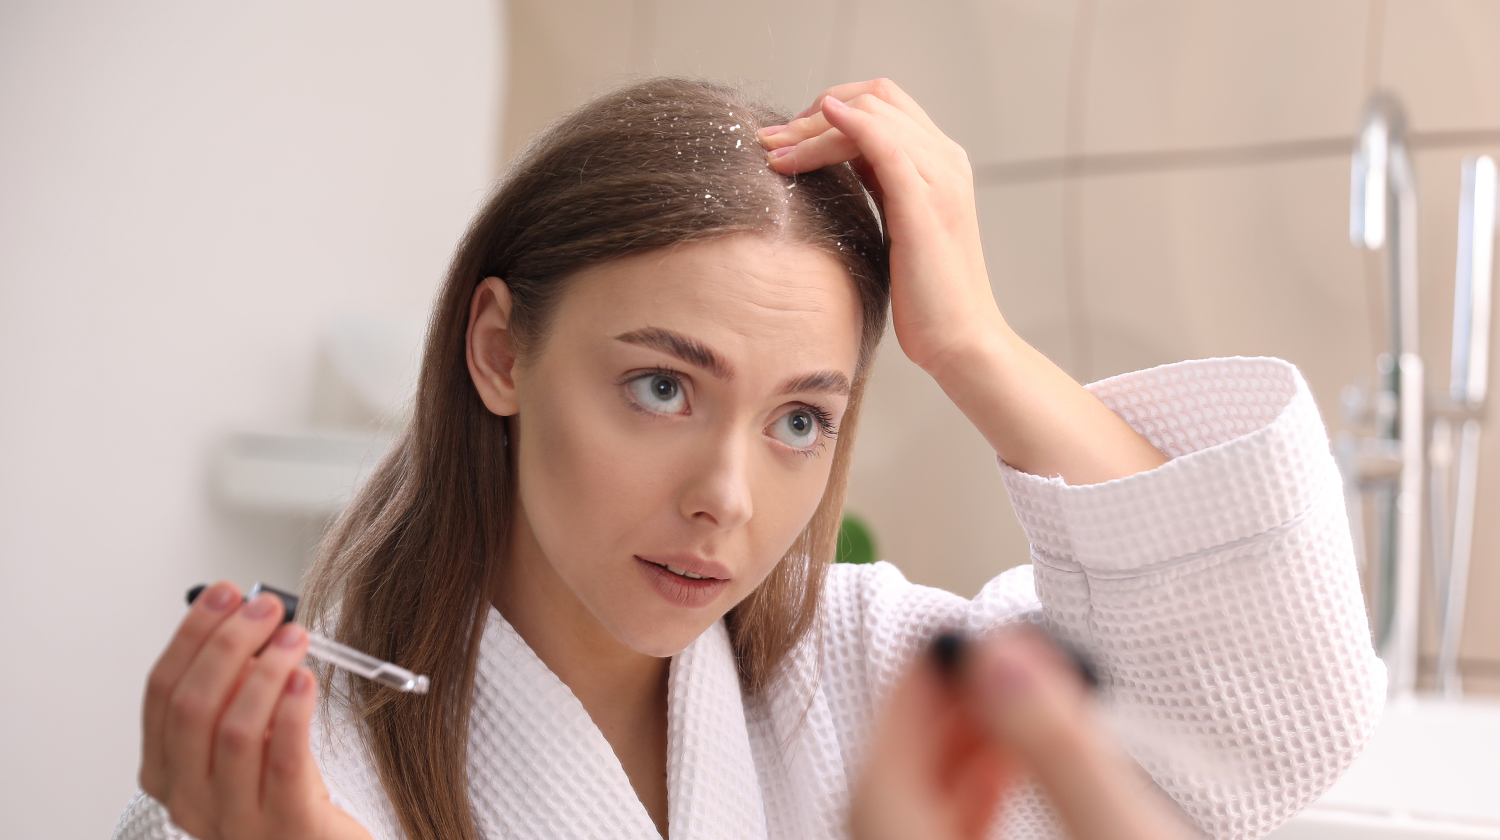 Does Dandruff Cause Hair Loss? The Link & Ways To Avoid 2023